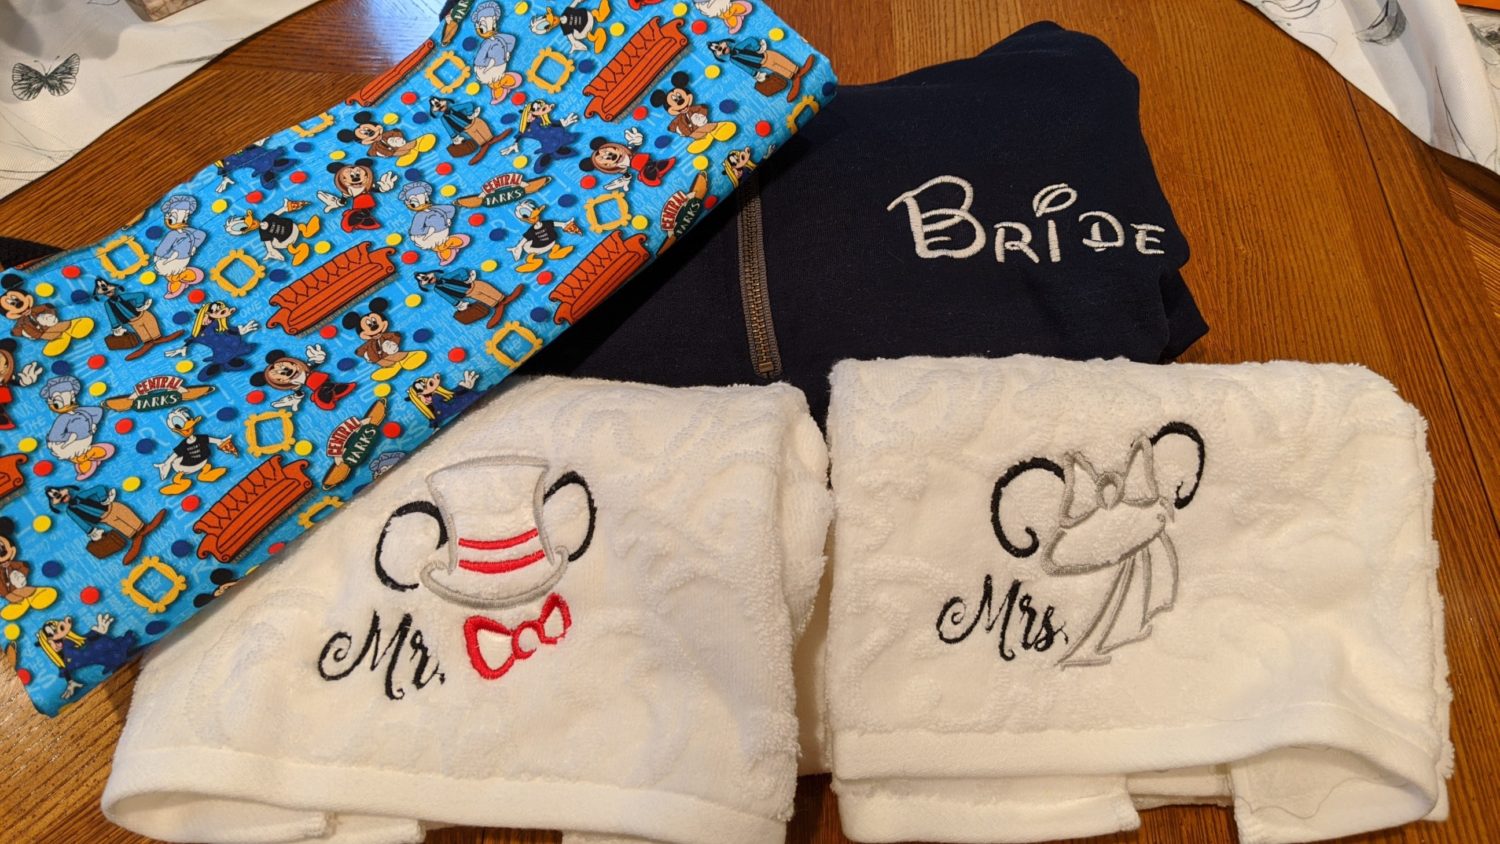 Disney Vacation Gift Guide — Abroad Wife-Familly Travel